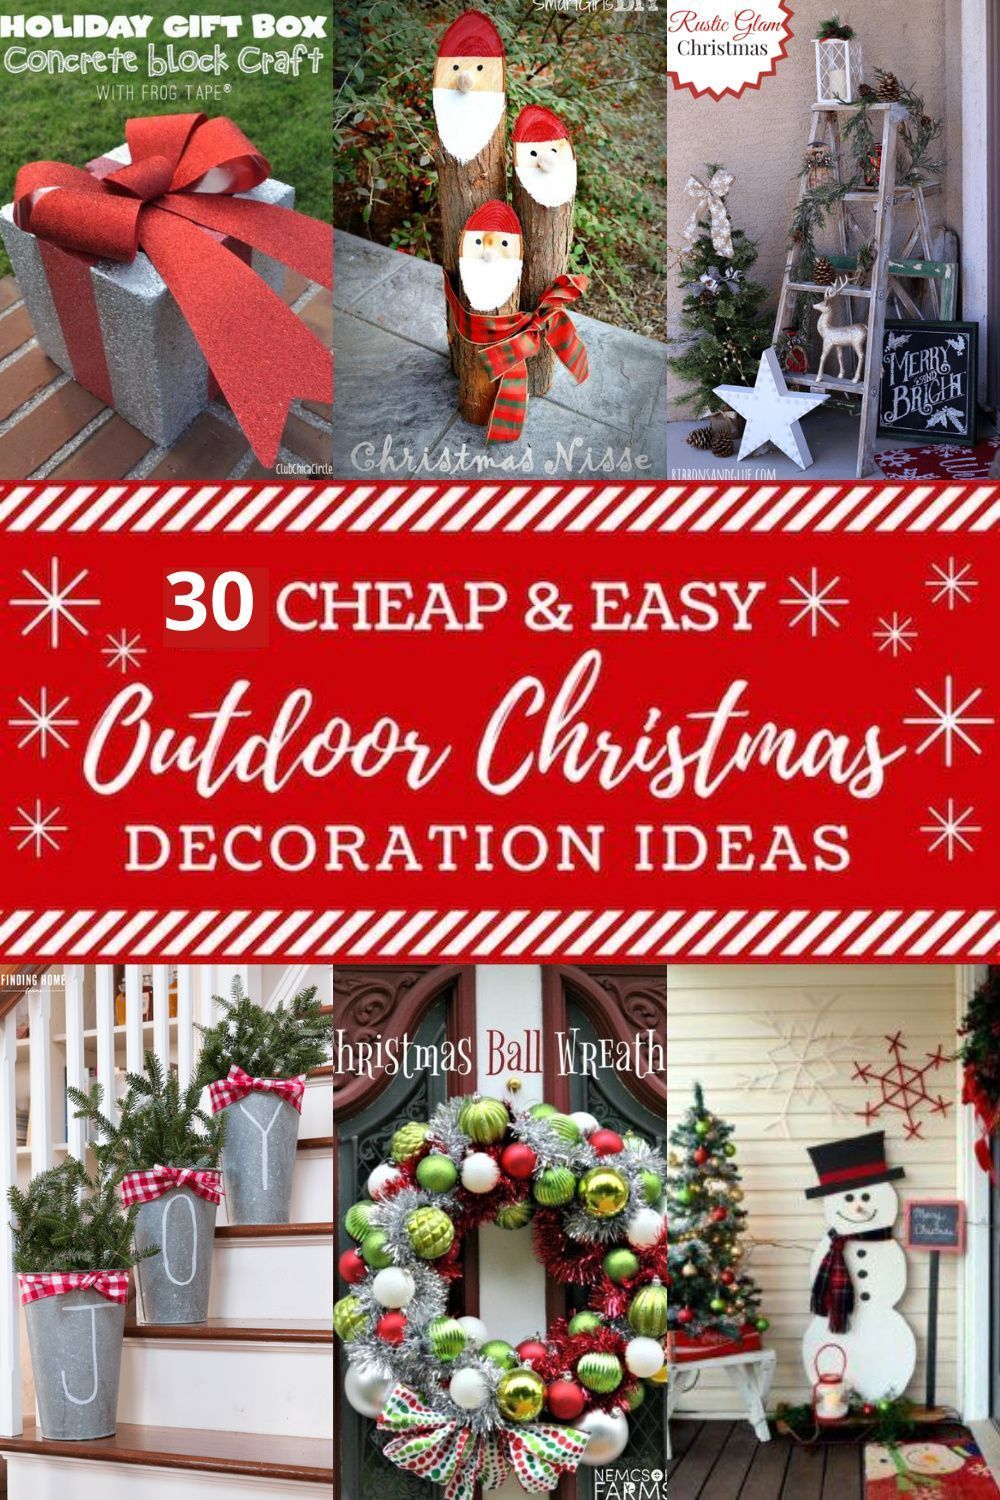 30 Cheap And Easy Outdoor Christmas Decoration Ideas - 30 Cheap And Easy Outdoor Christmas Decoration Ideas -   23 diy christmas decorations outdoor easy ideas